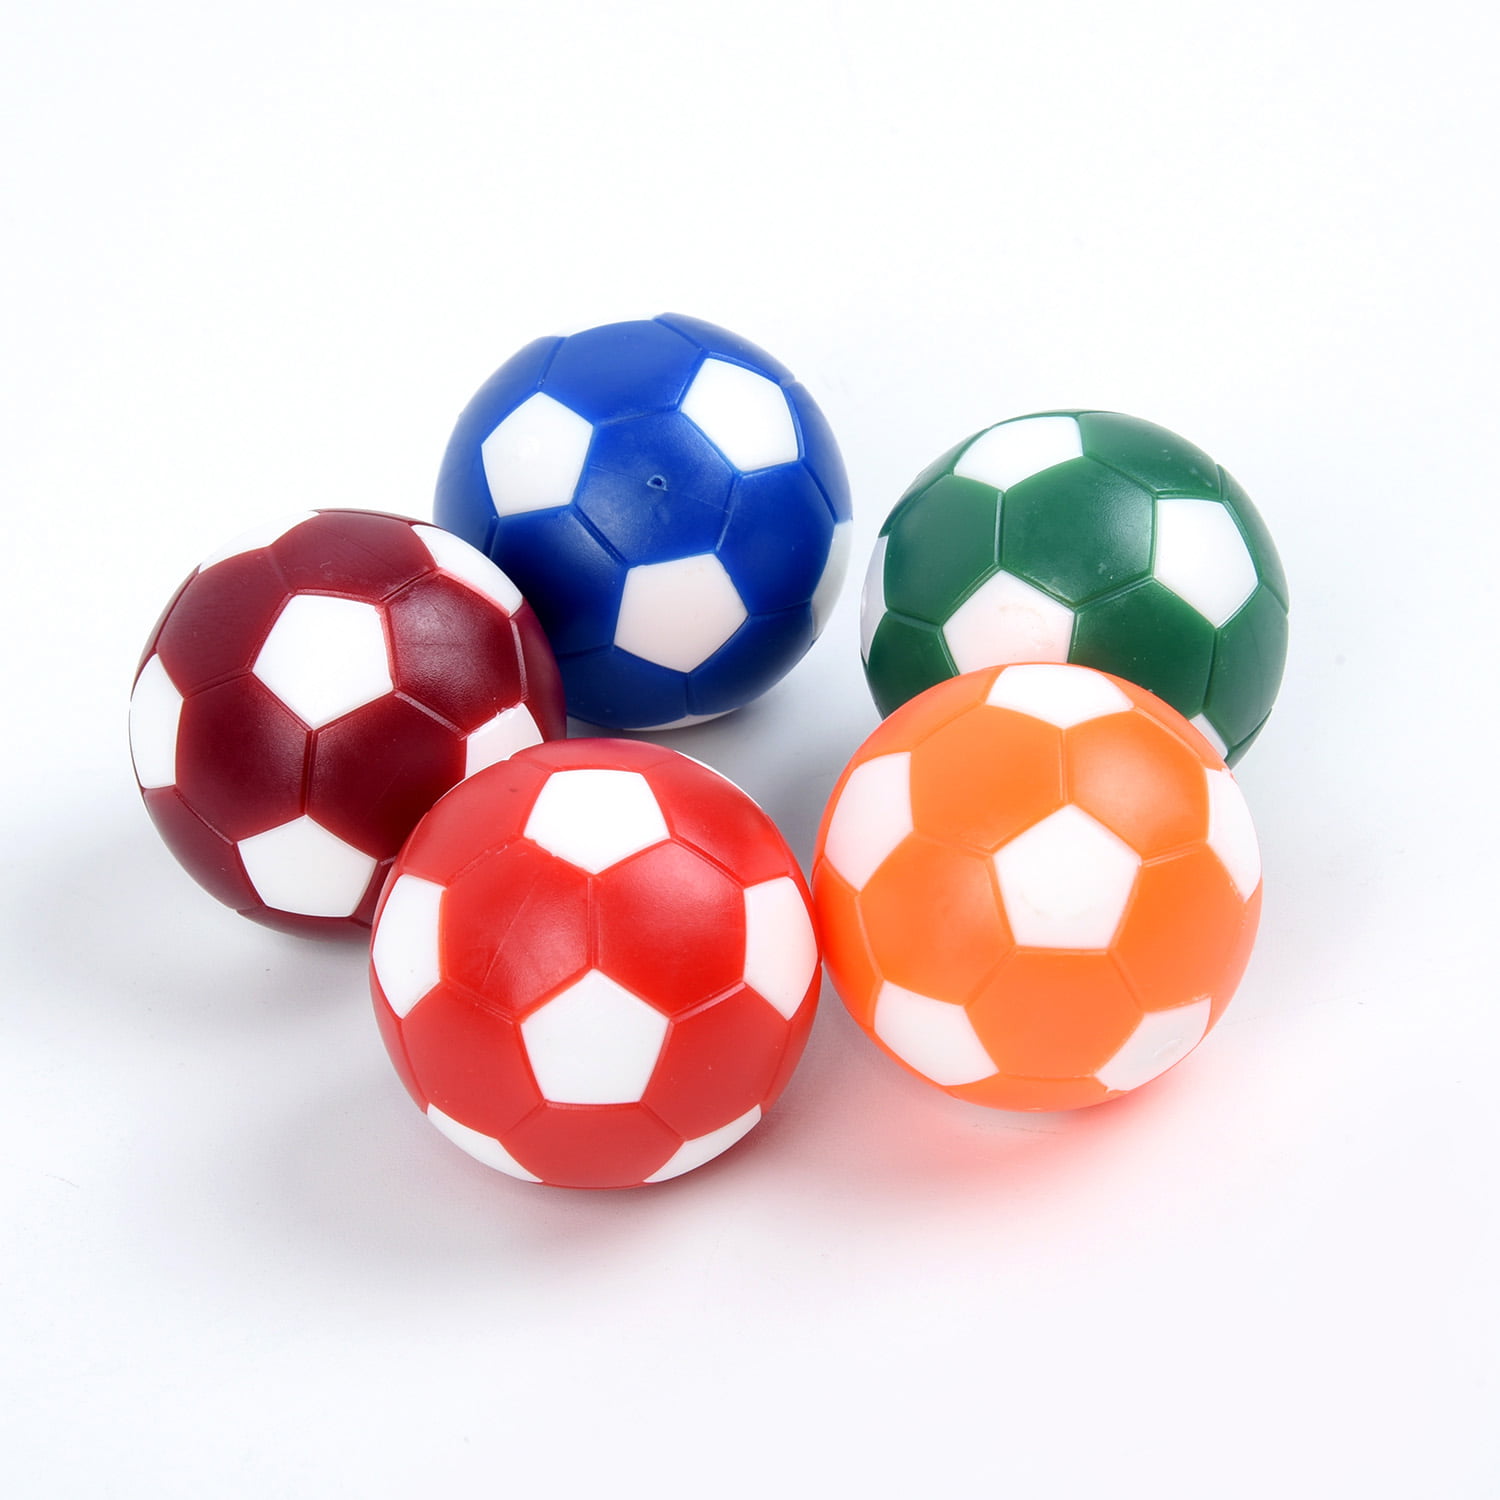 8pc Foosball Balls Fussball Ball Replacement Fresh For Soccer Table Game 